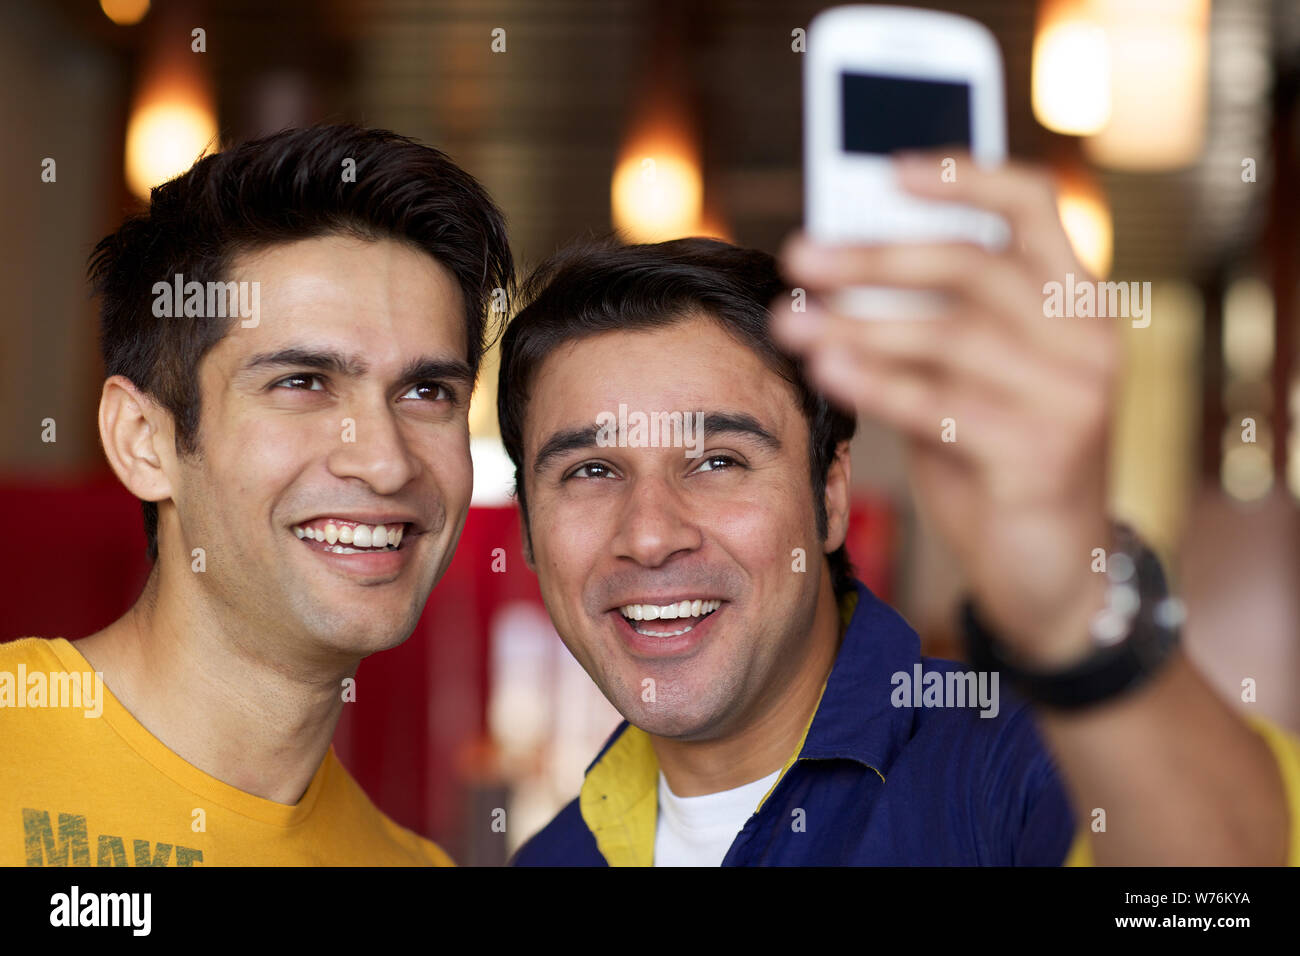 Indian friends taking a picture of themselves with a mobile phone in a restaurant Stock Photo